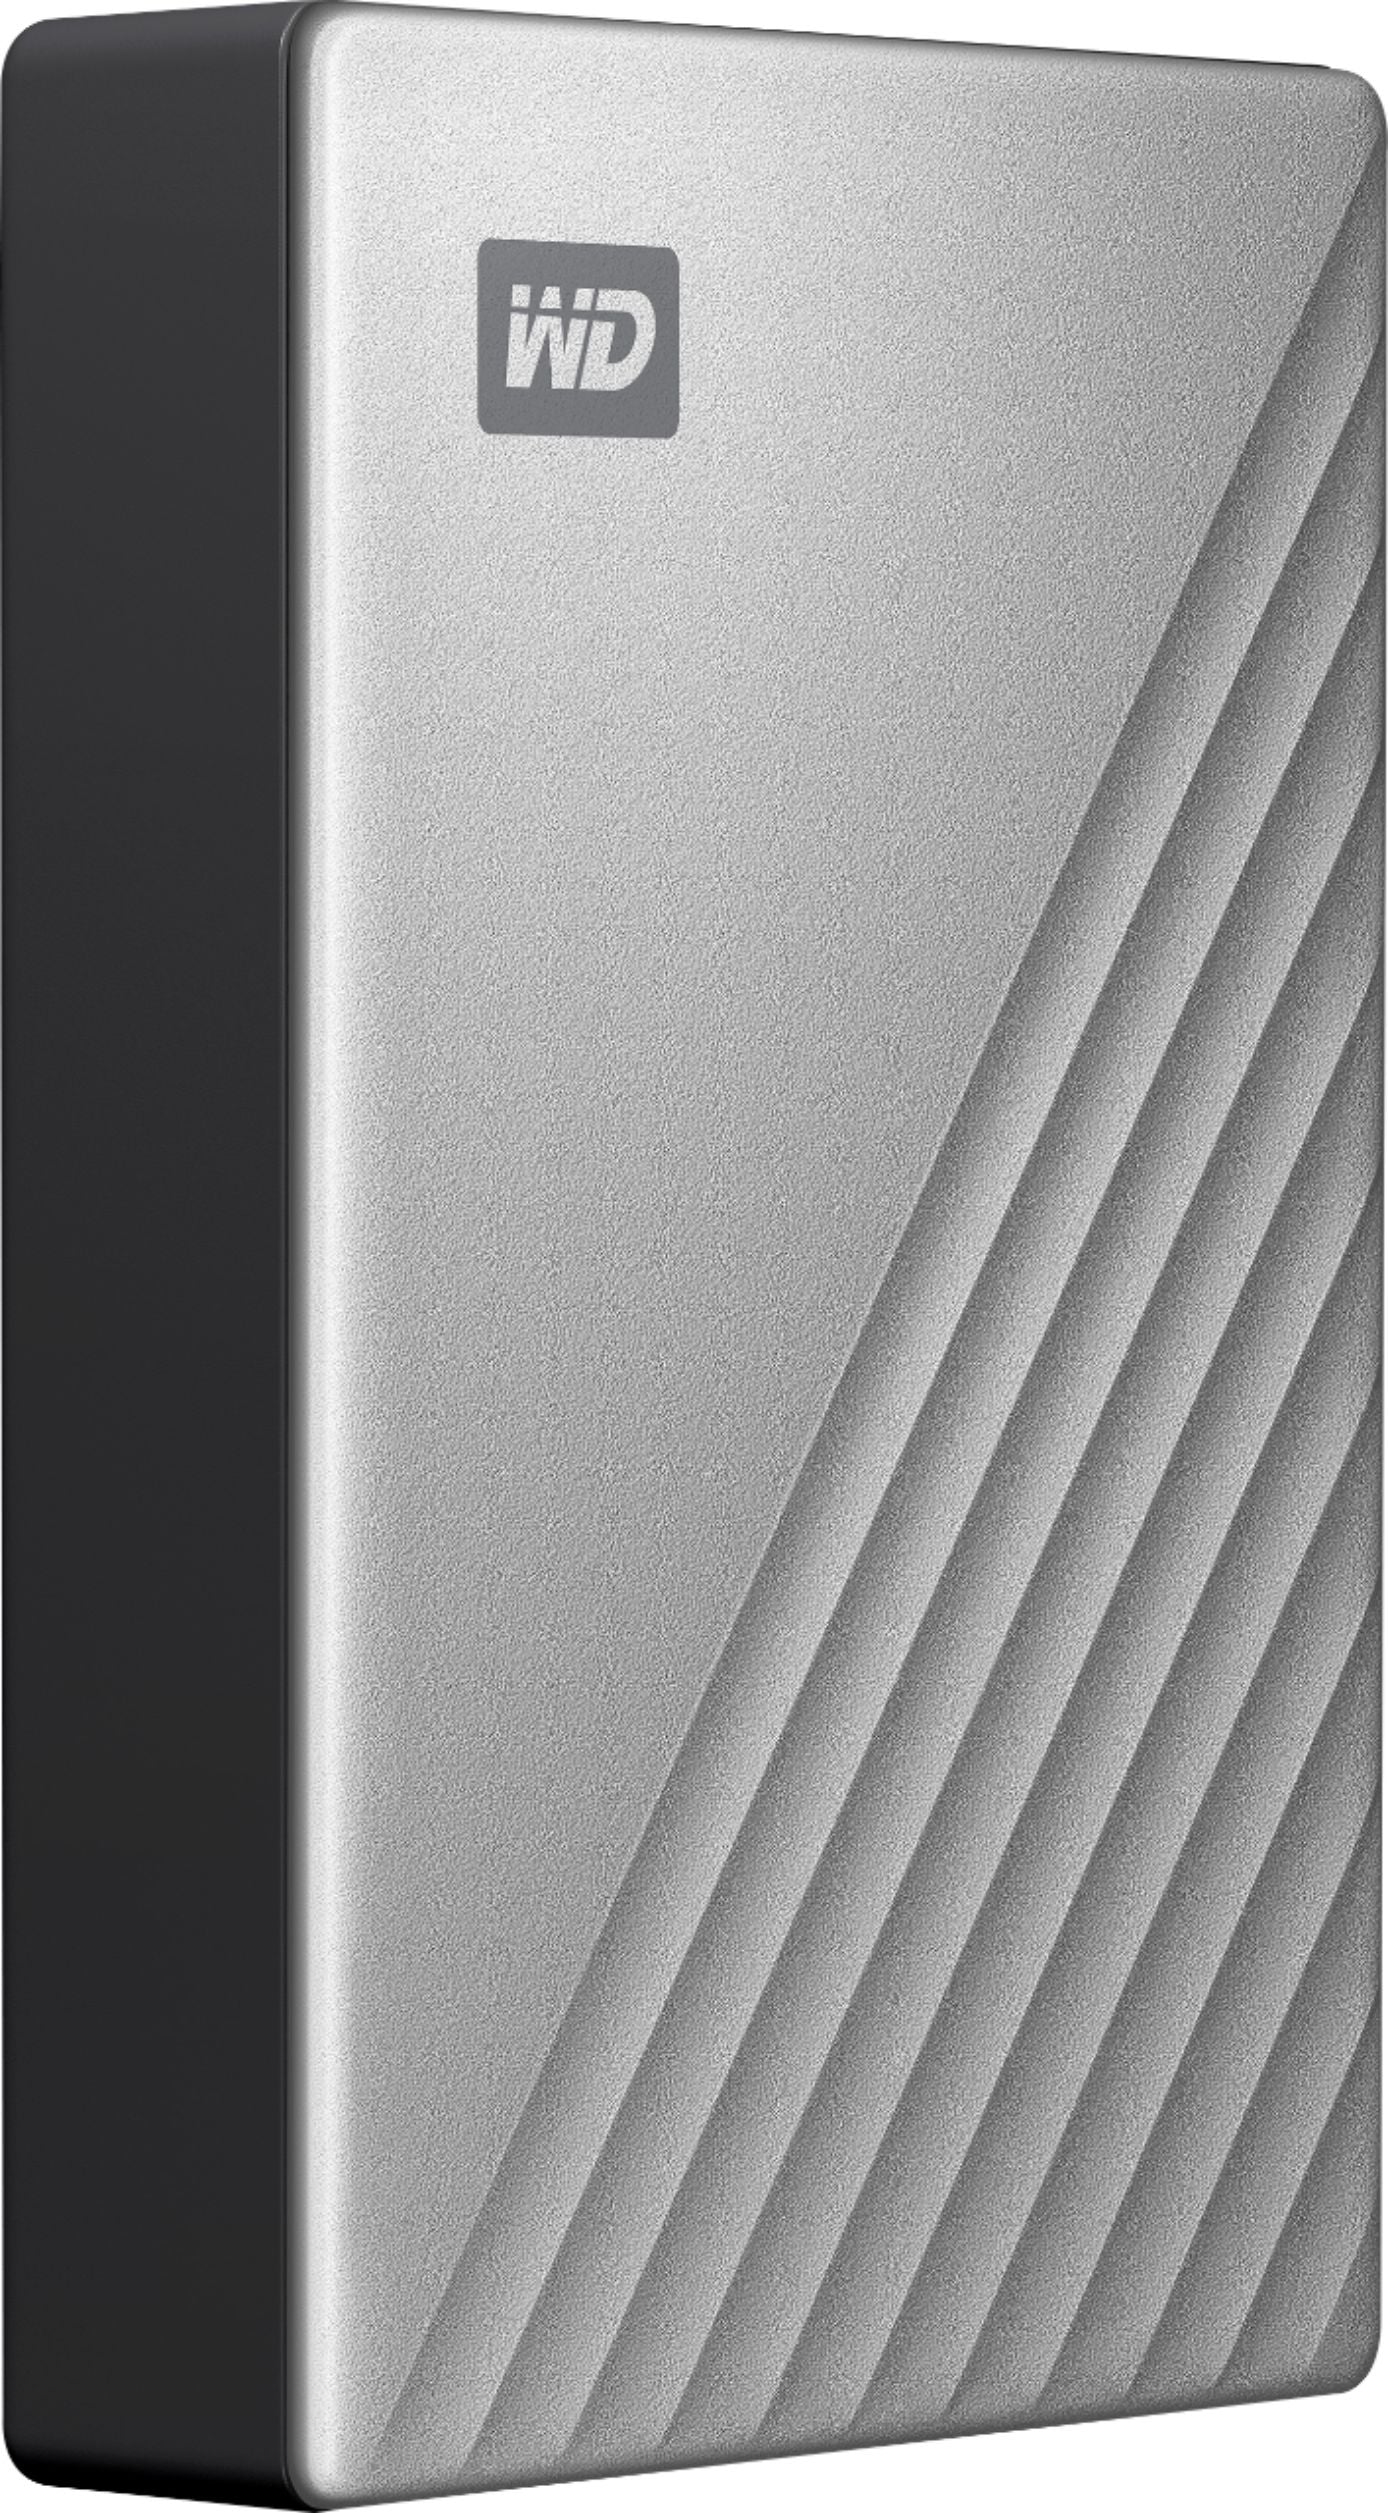 WD - My Passport Ultra 4TB External USB 3.0 Portable Hard Drive with Silver